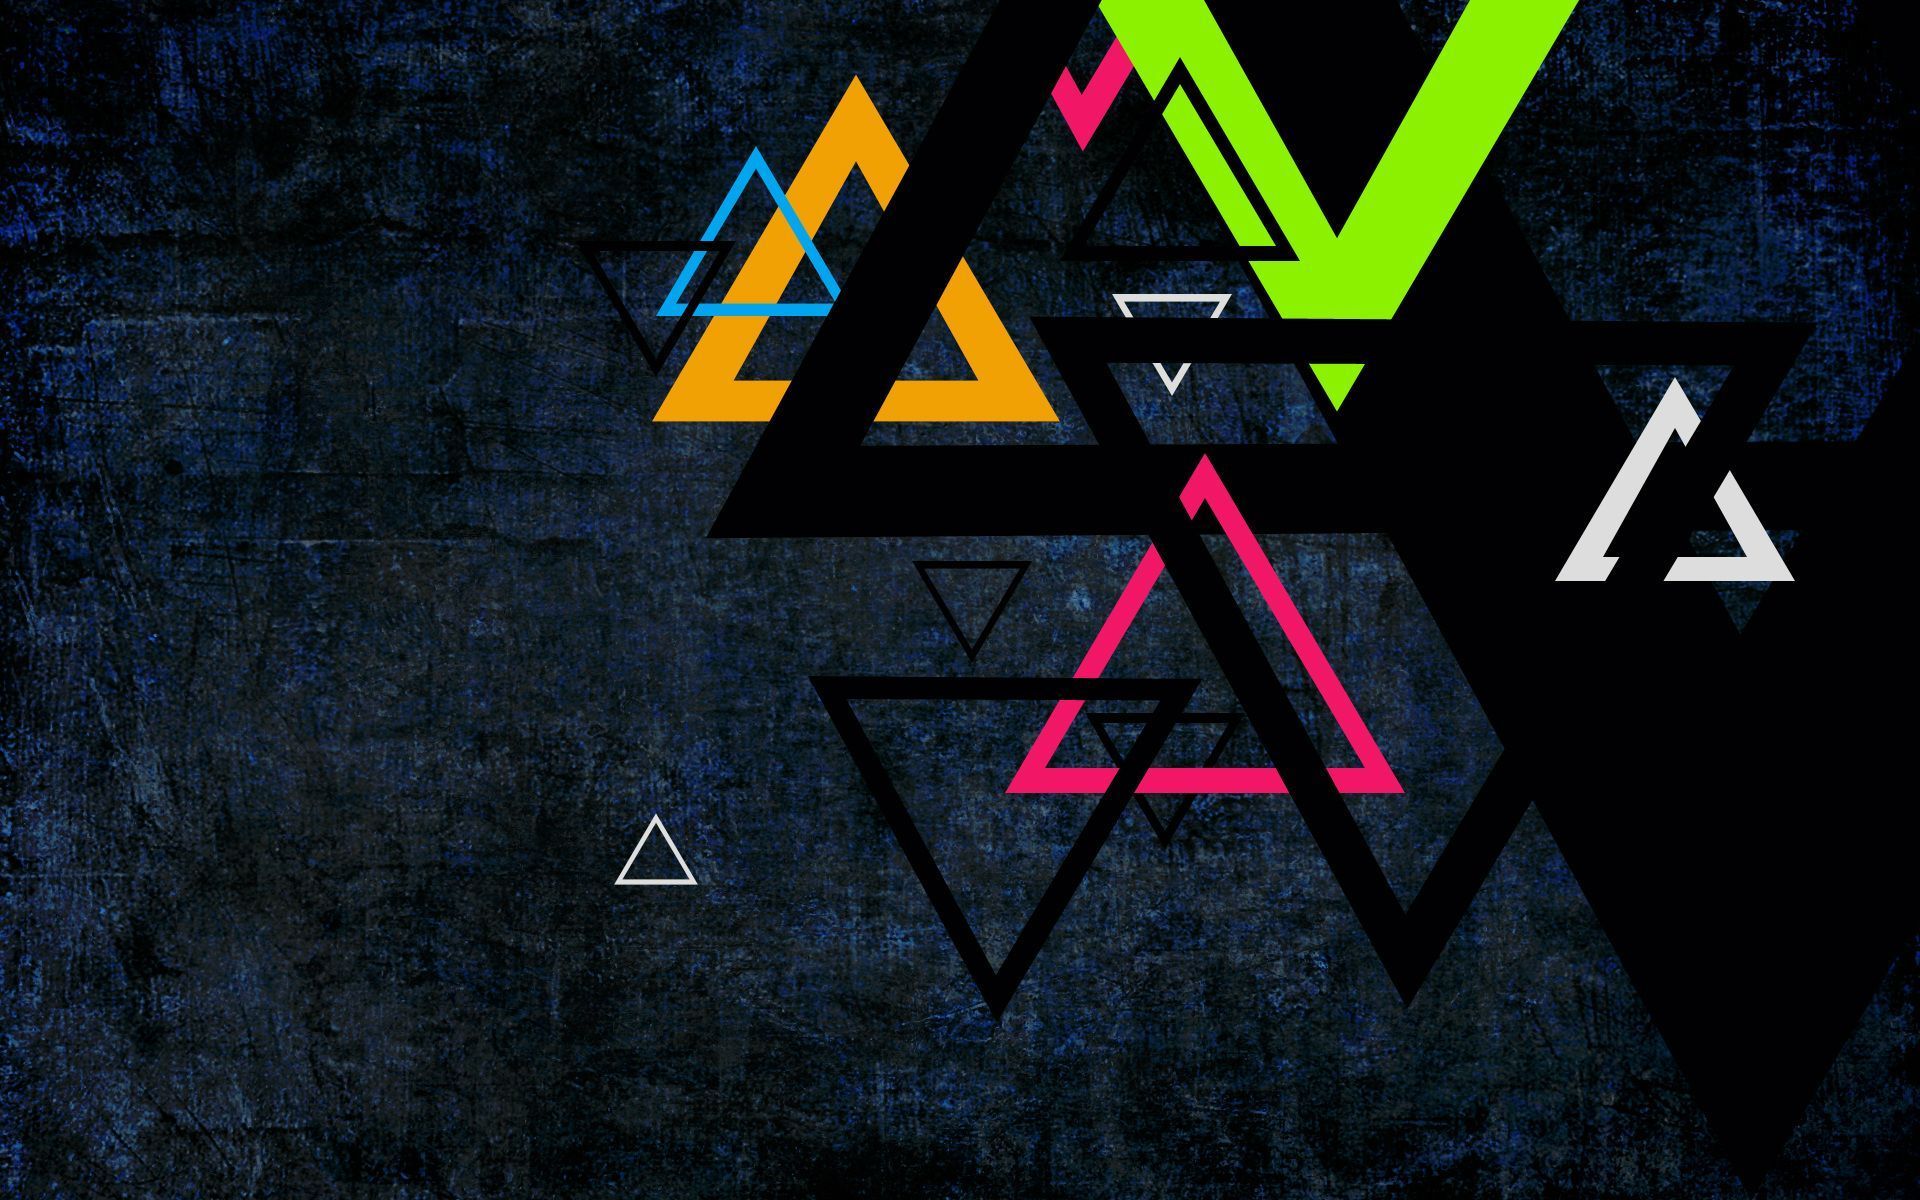 35 Triangle wallpapers for your Android